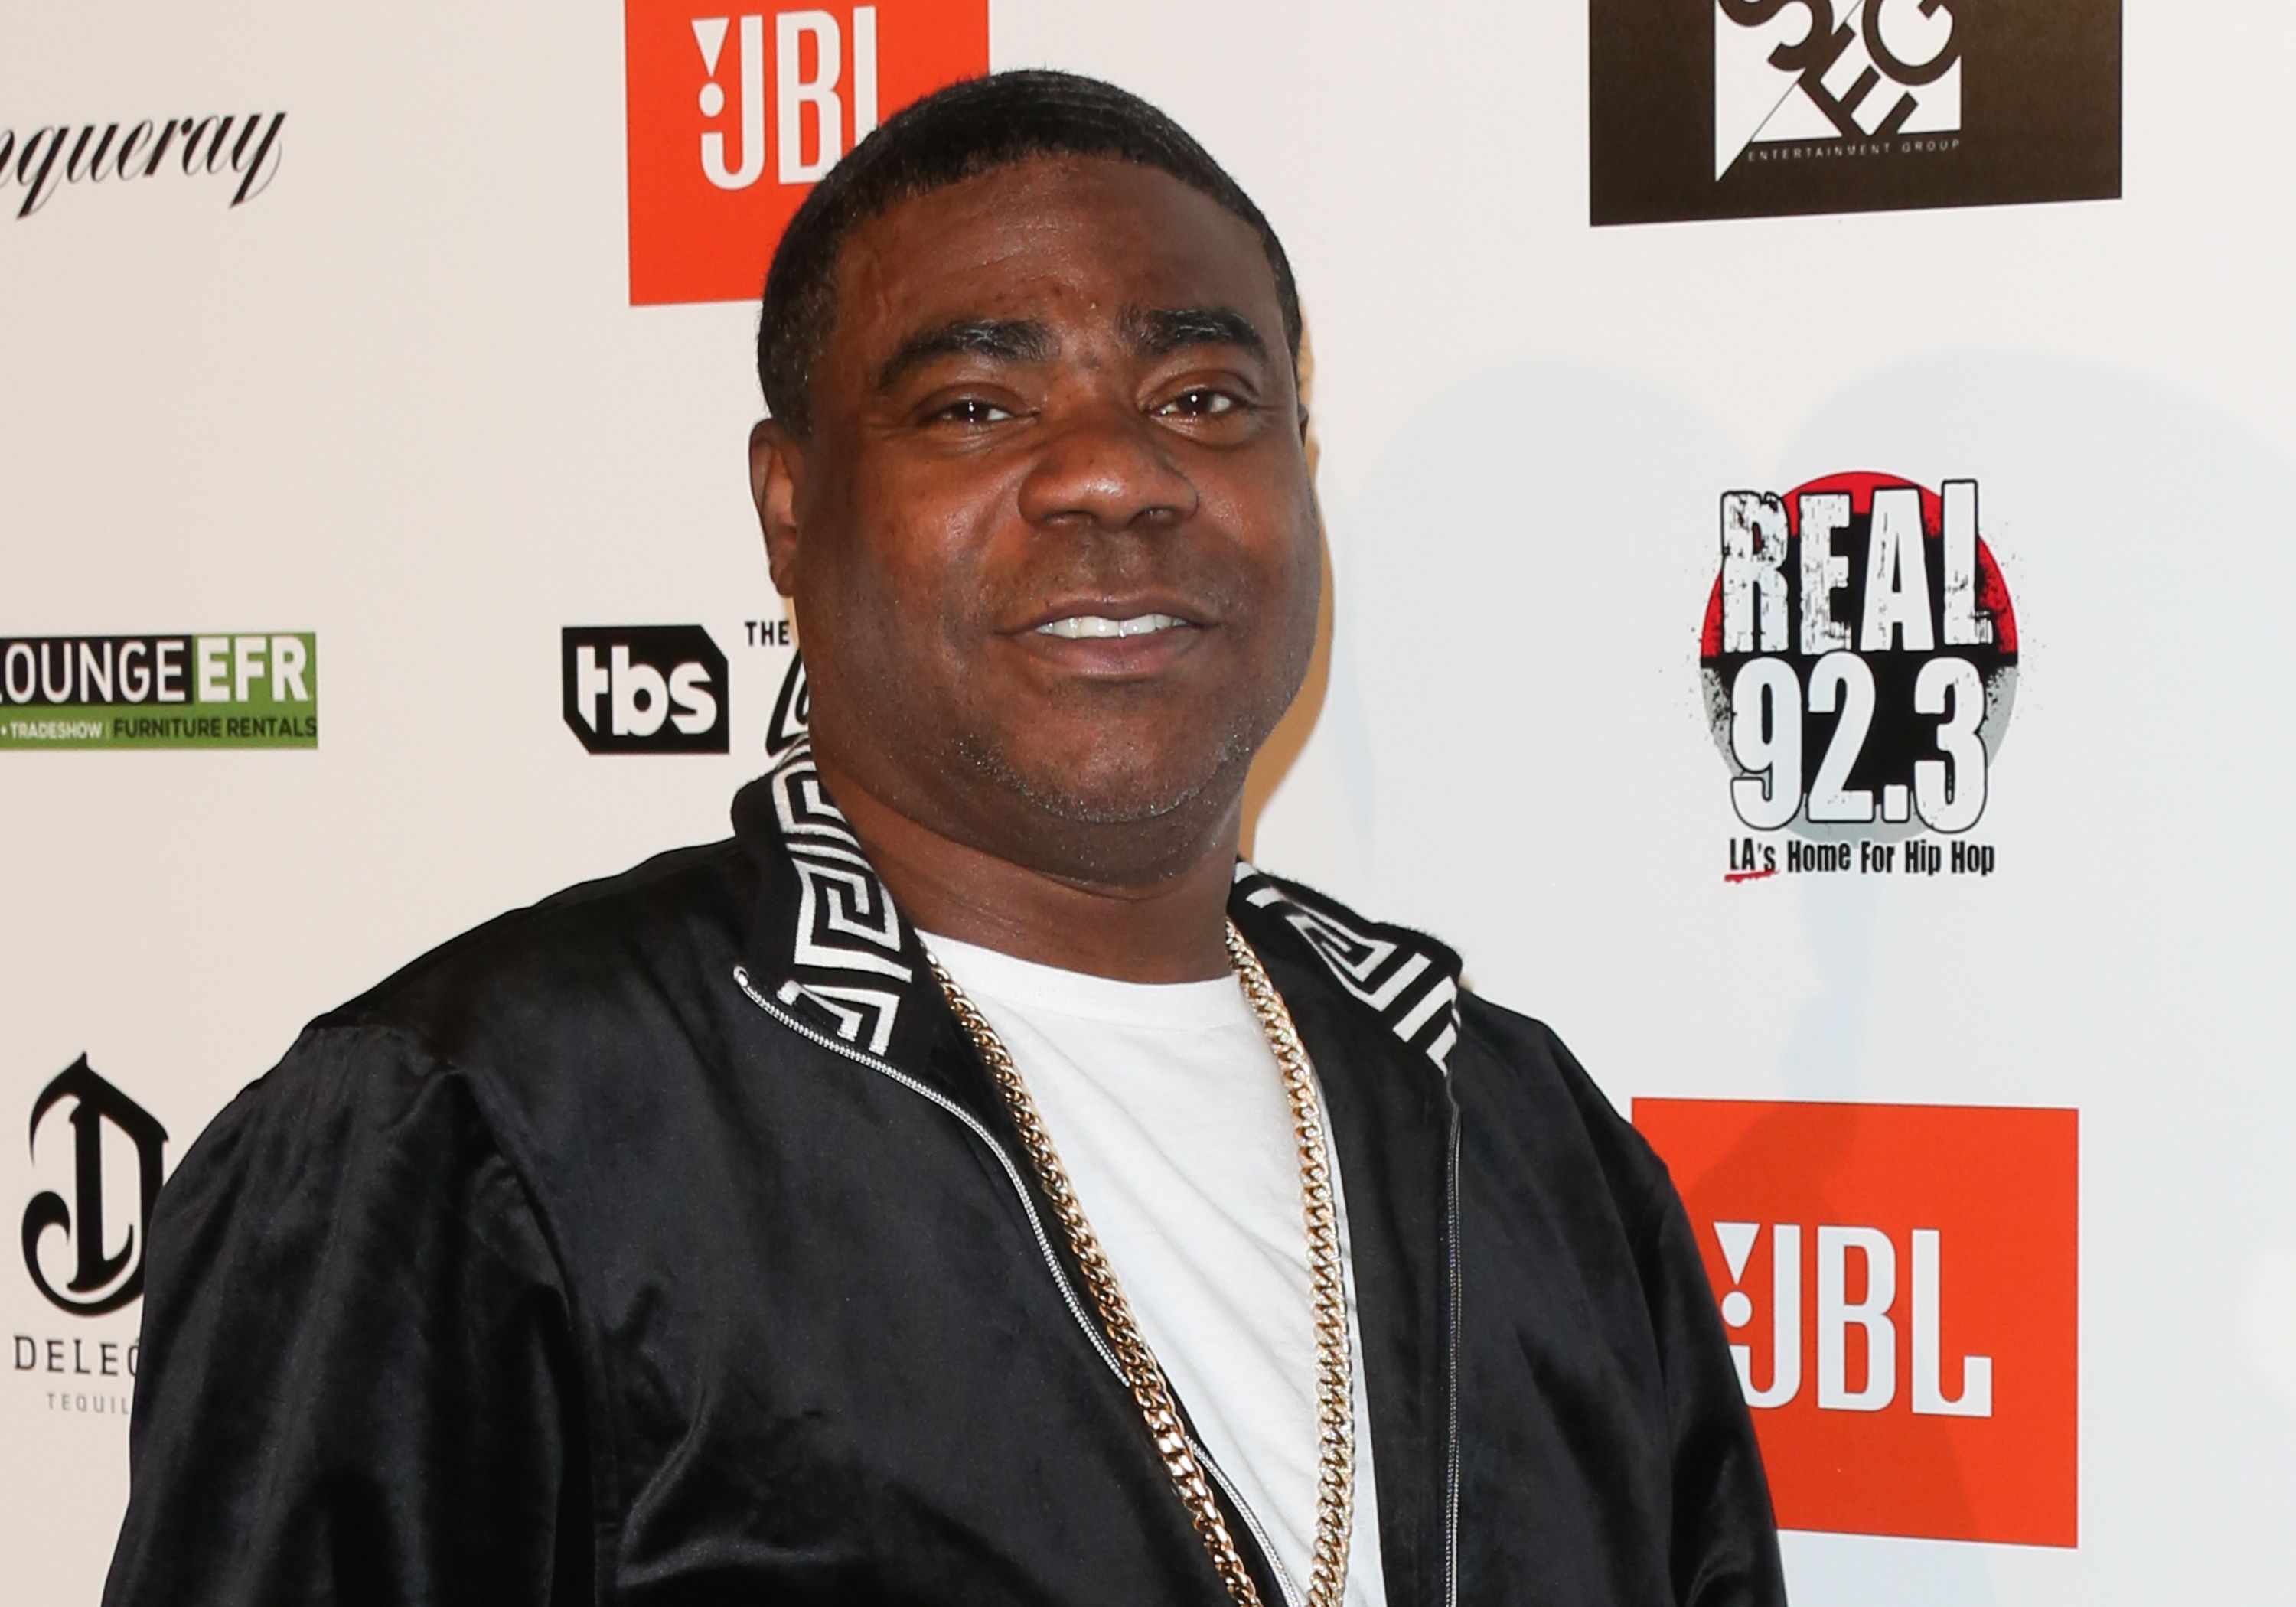 Tracy Morgan at the Kenny "The Jet" Smith's annual All-Star bash at Paramount Studios on February 16, 2018 in Hollywood, California | Photo: Getty Images  